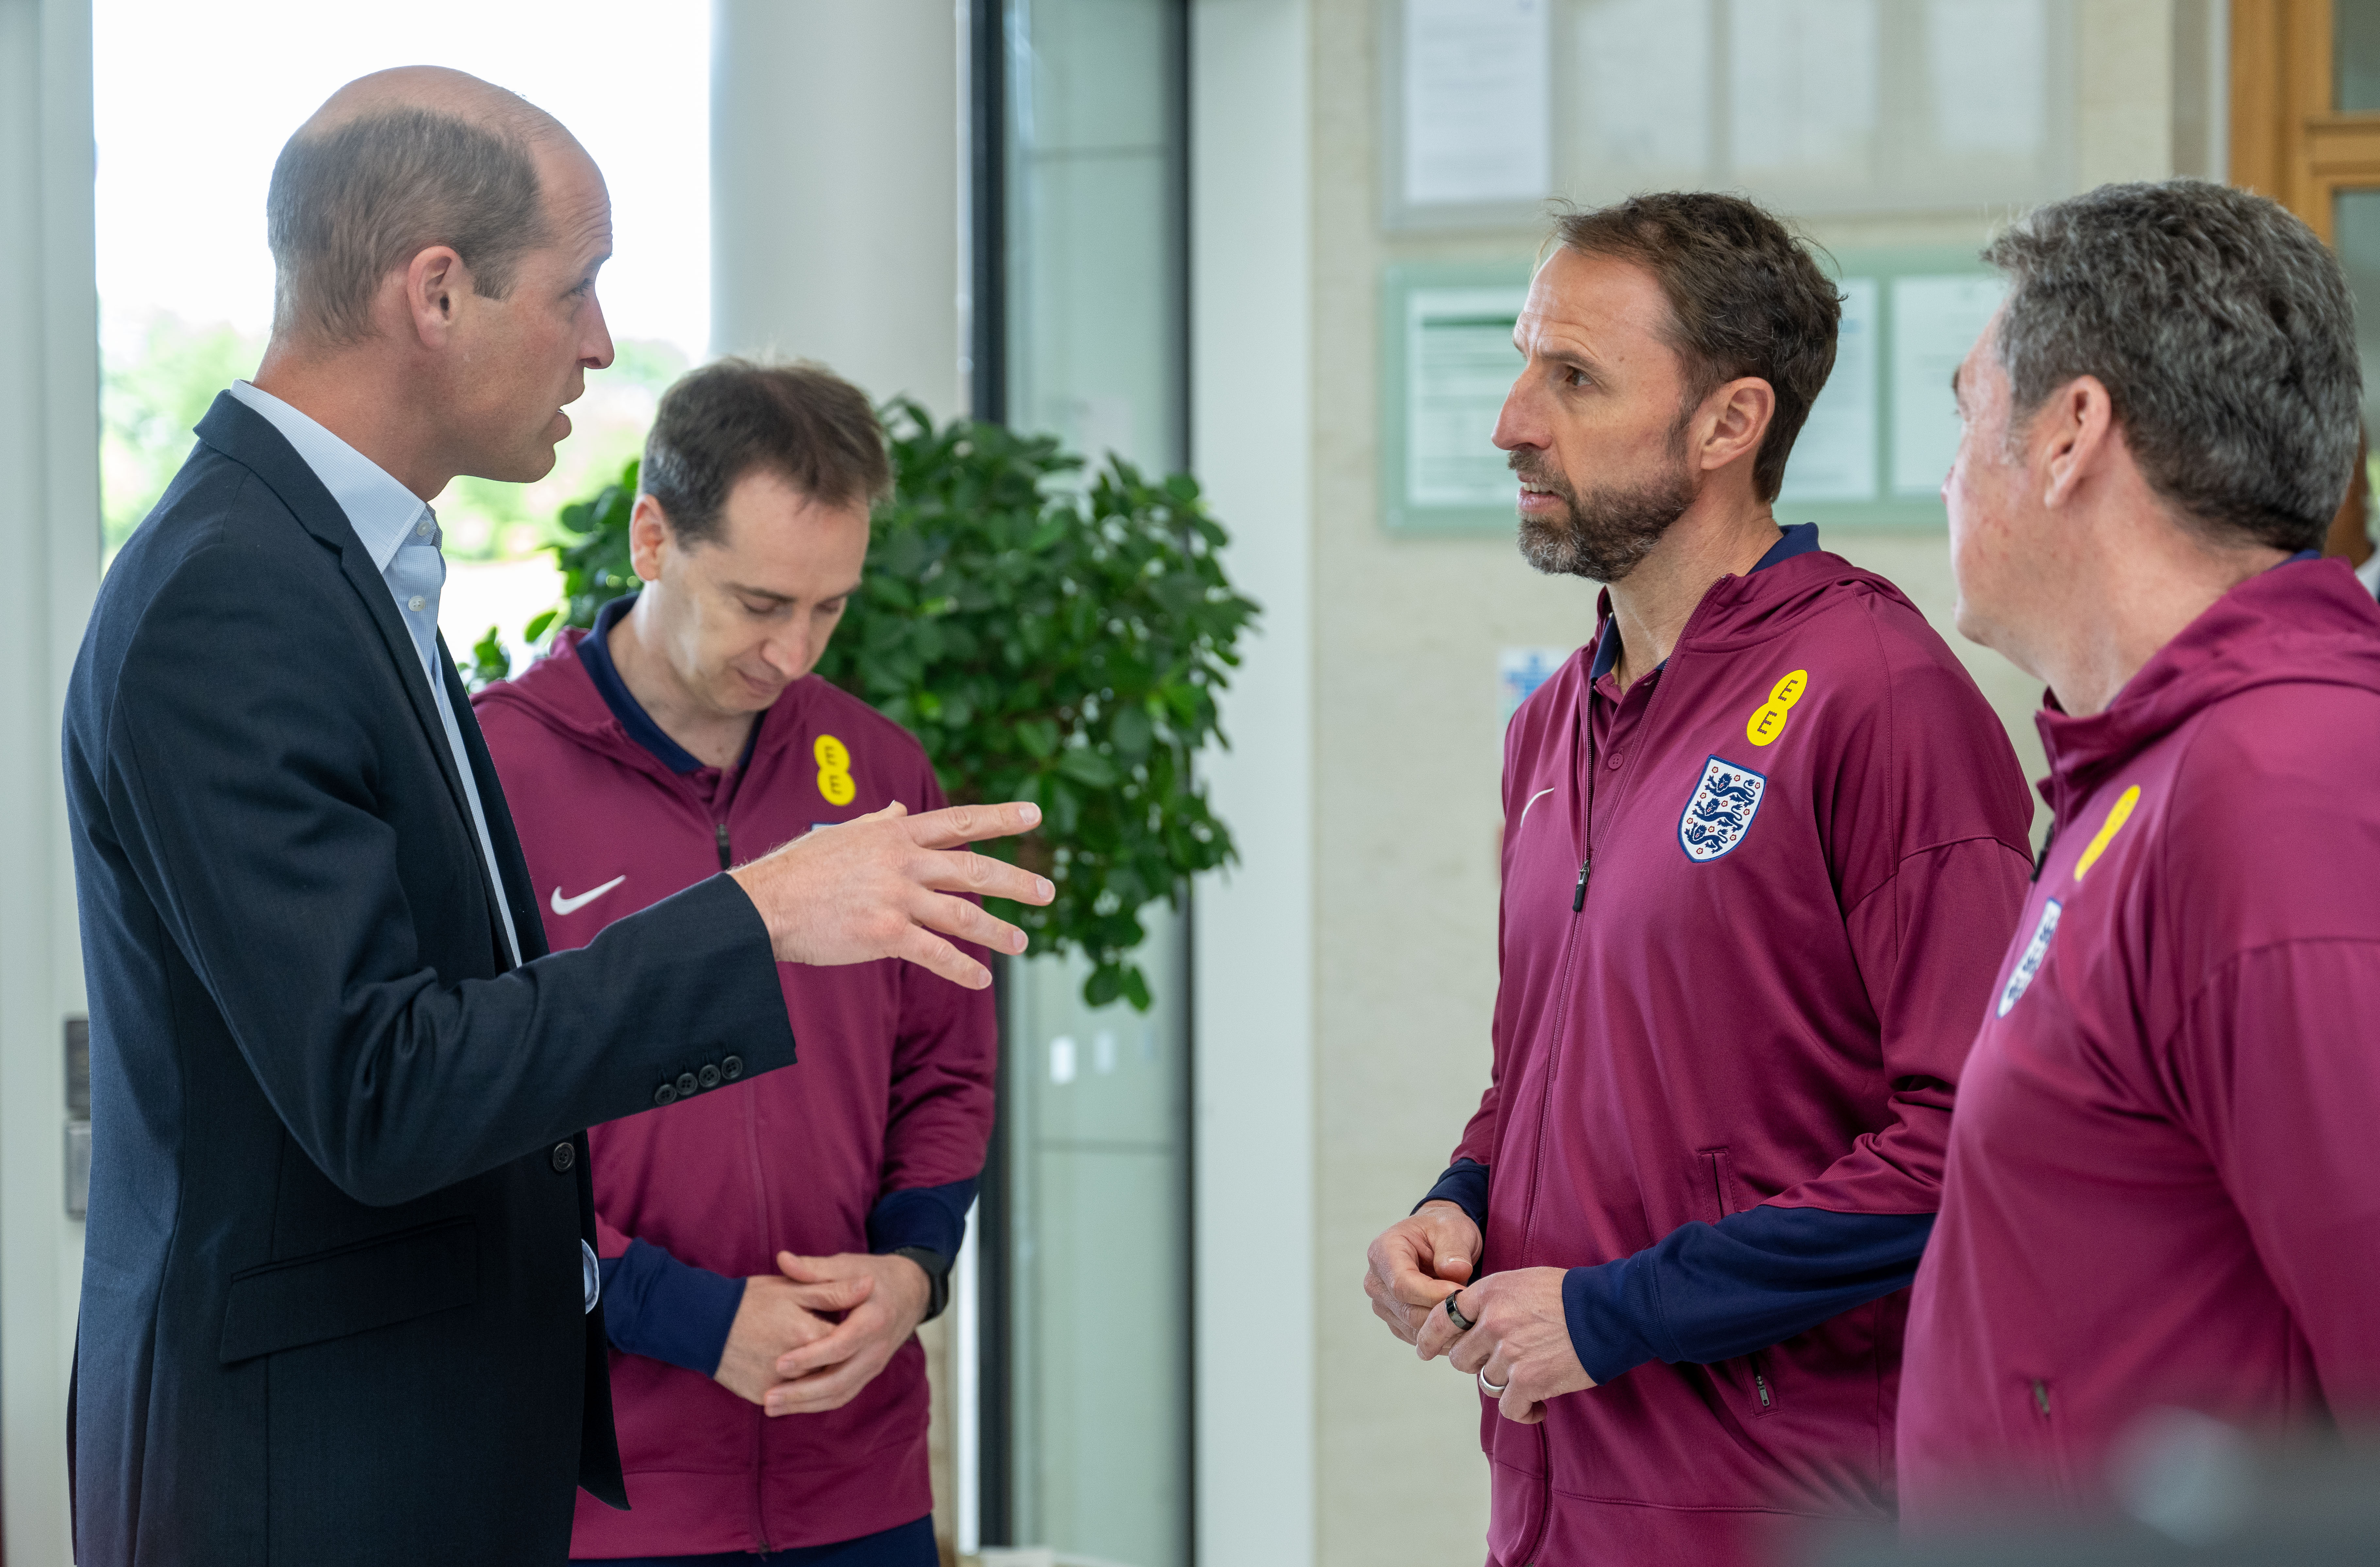 The England team received their numbered shirts today from Prince William